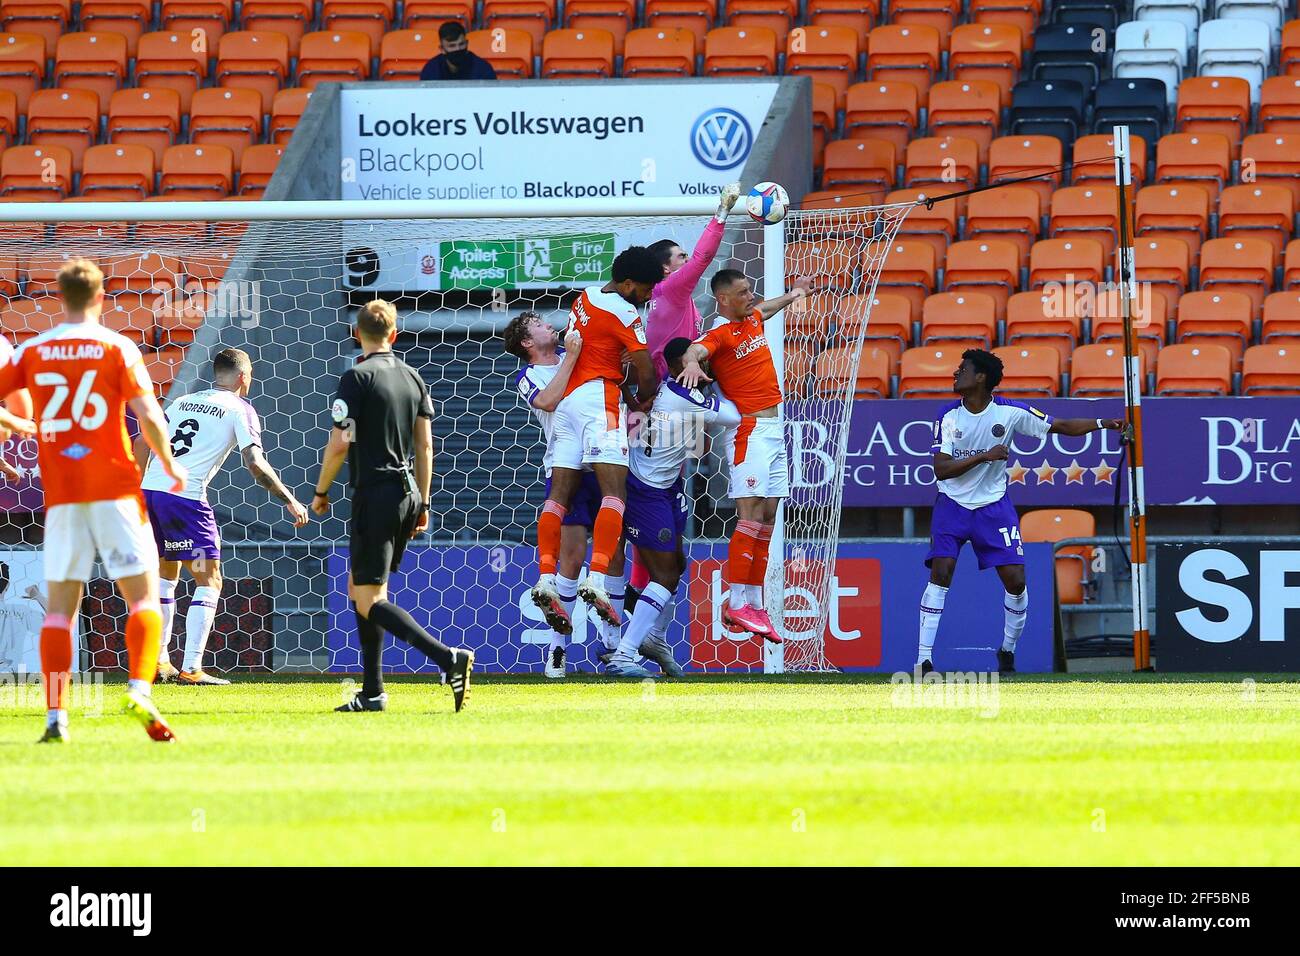 Bloomfield Road, Blackpool, UK. 24th Apr, 2021. Harry Burgoyne Goalkeeper of Shrewsbury with a great punch clearance during the game Blackpool v Shrewsbury Sky Bet League One 2020/21 Bloomfield Road, Blackpool, England - 24th April 2021 Credit: Arthur Haigh/Alamy Live News Stock Photo